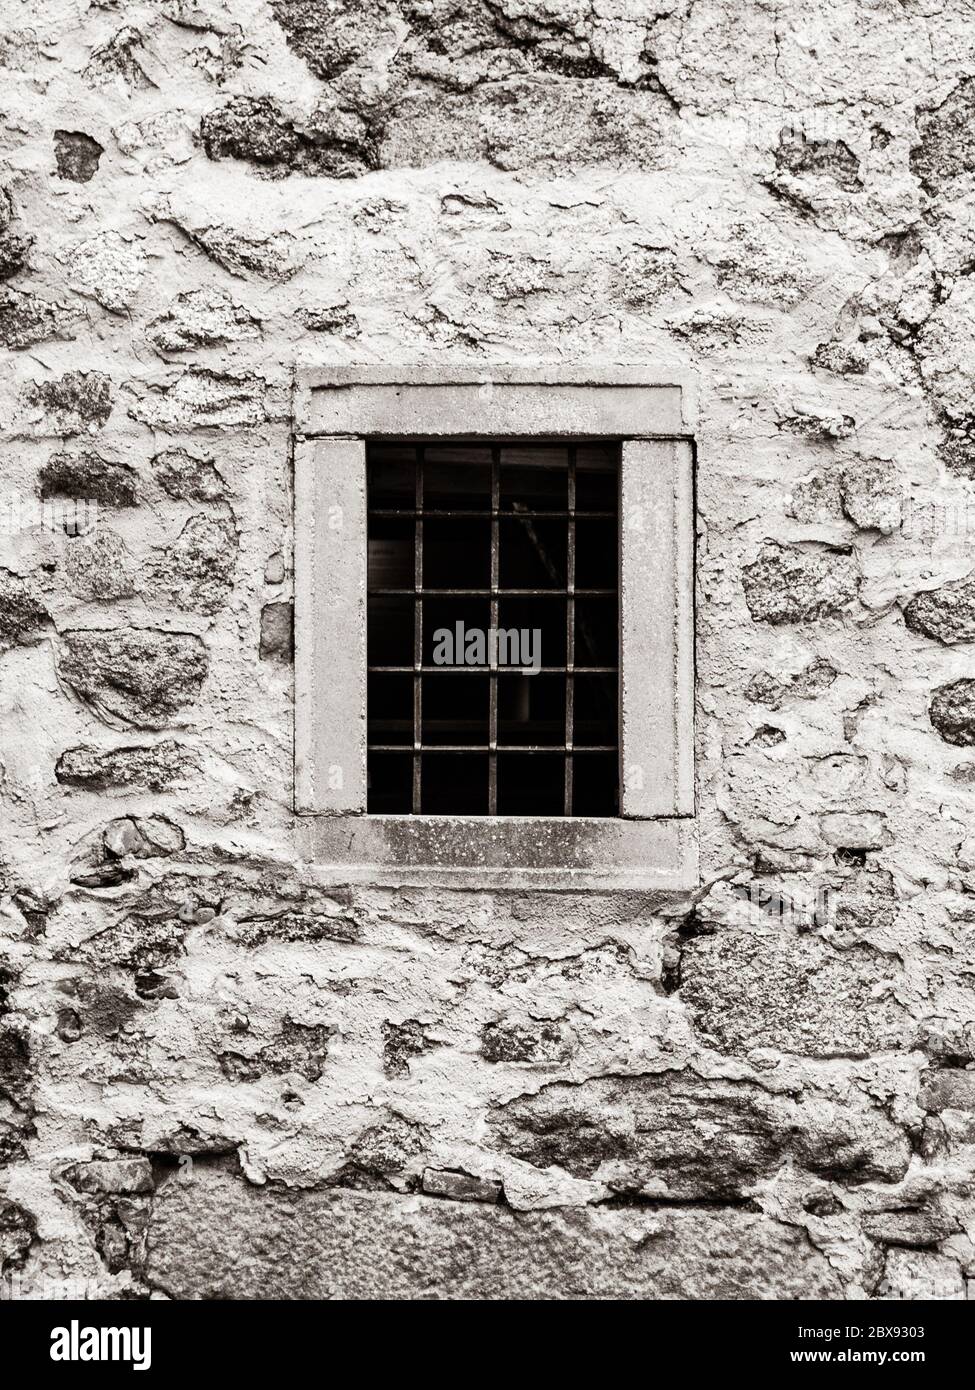 Old prison jail window with rusty metal bars. Vintage style image. Stock Photo